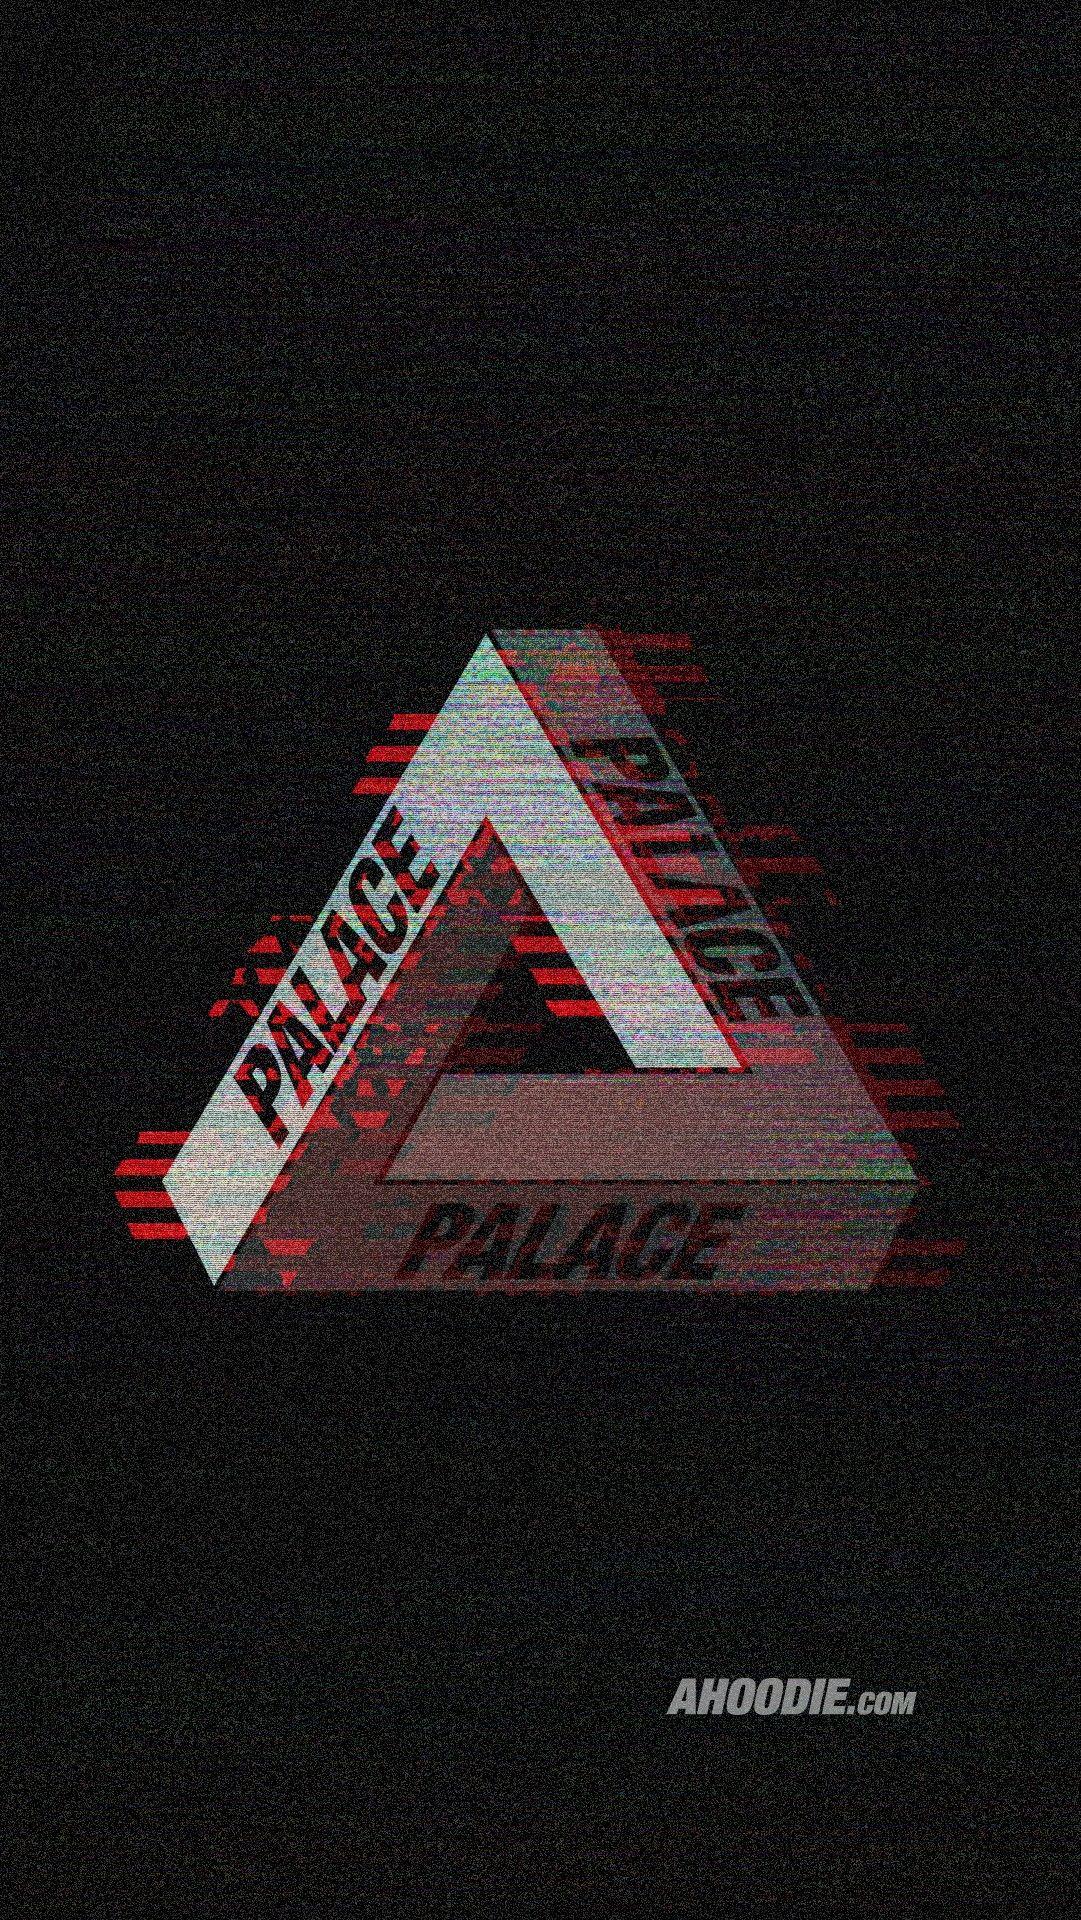 Ahoodie. Palace Skateboards VHS Glitch Wallpaper